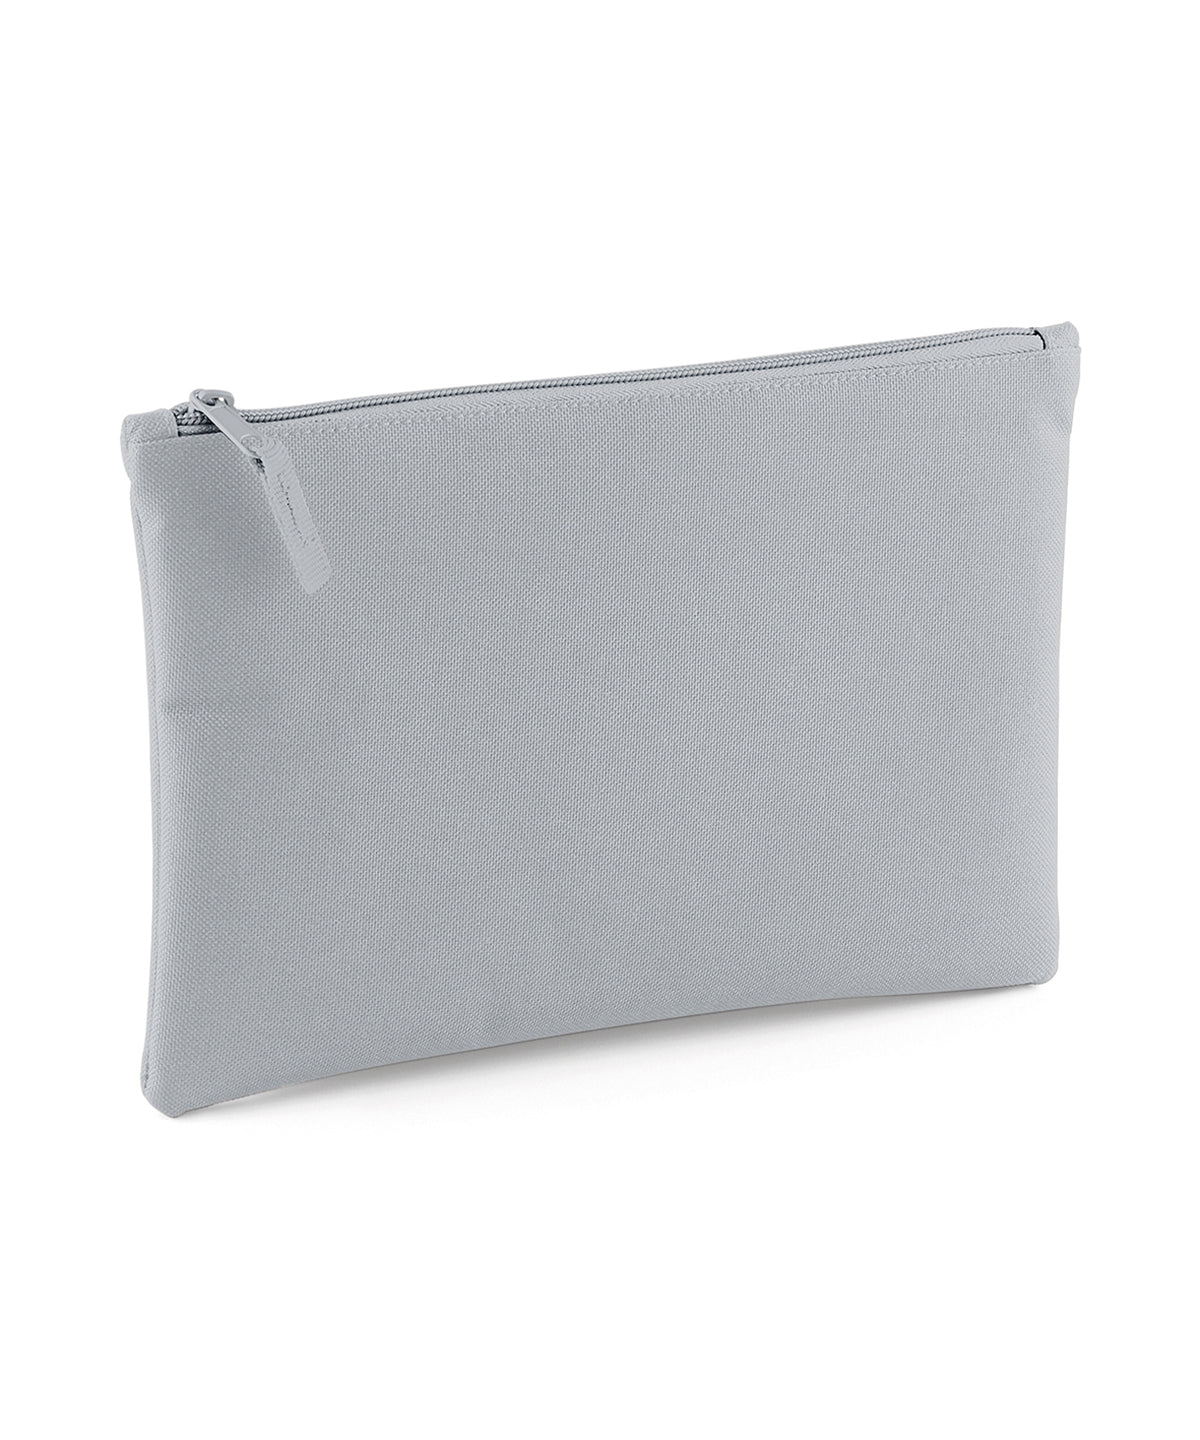 Personalised Bags - Light Grey Bagbase Grab pouch